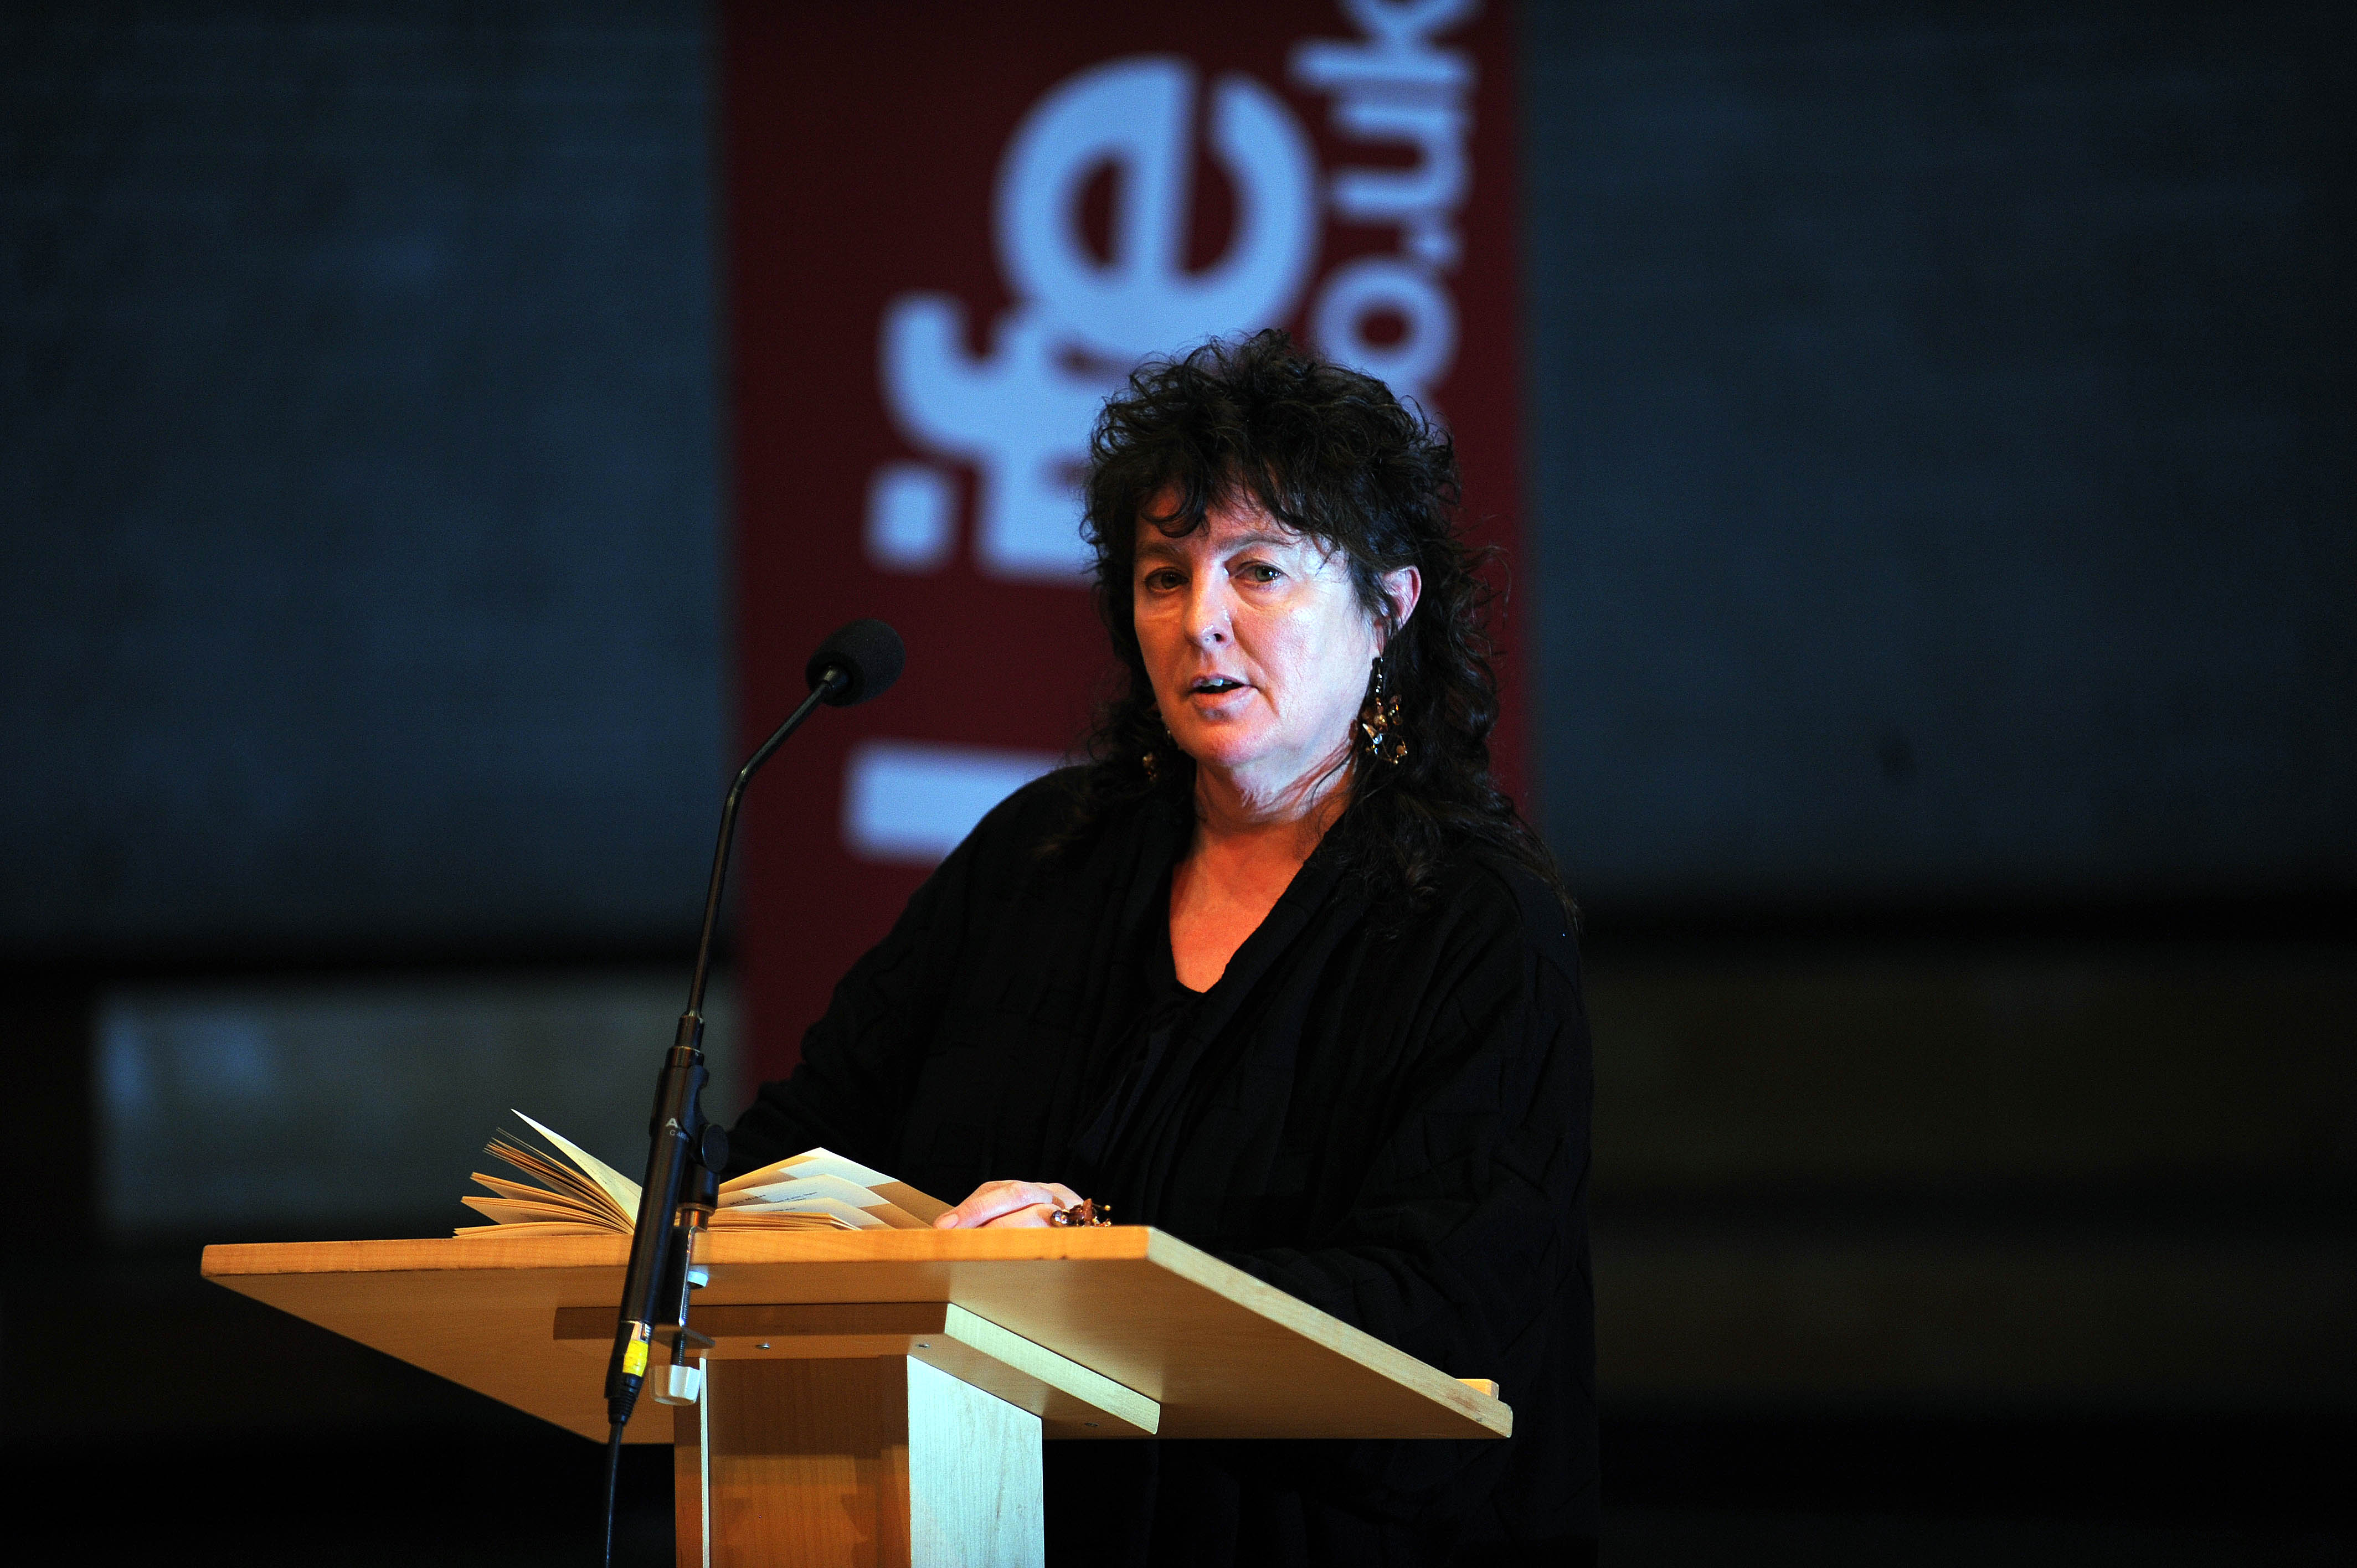 Carol Ann Duffy and the Manchester Writing School have brought together dozens of leading poets